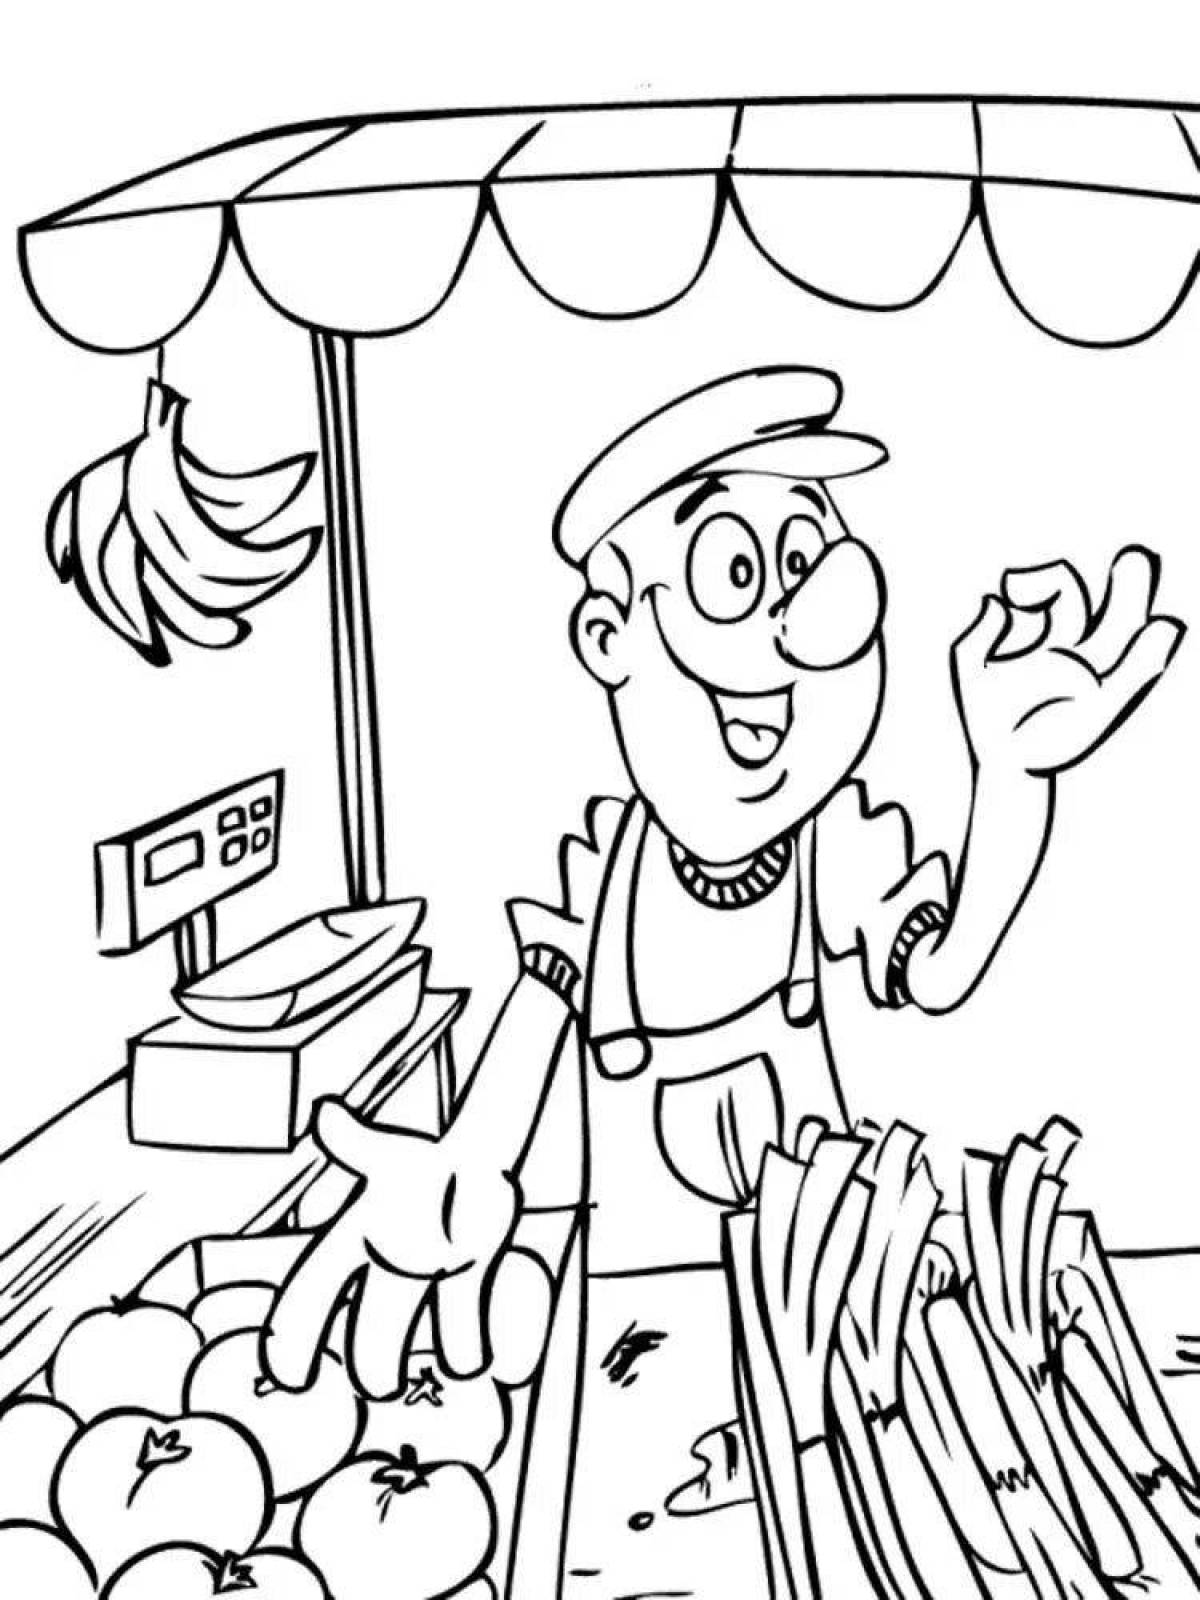 Incentive salesman coloring book for beginners